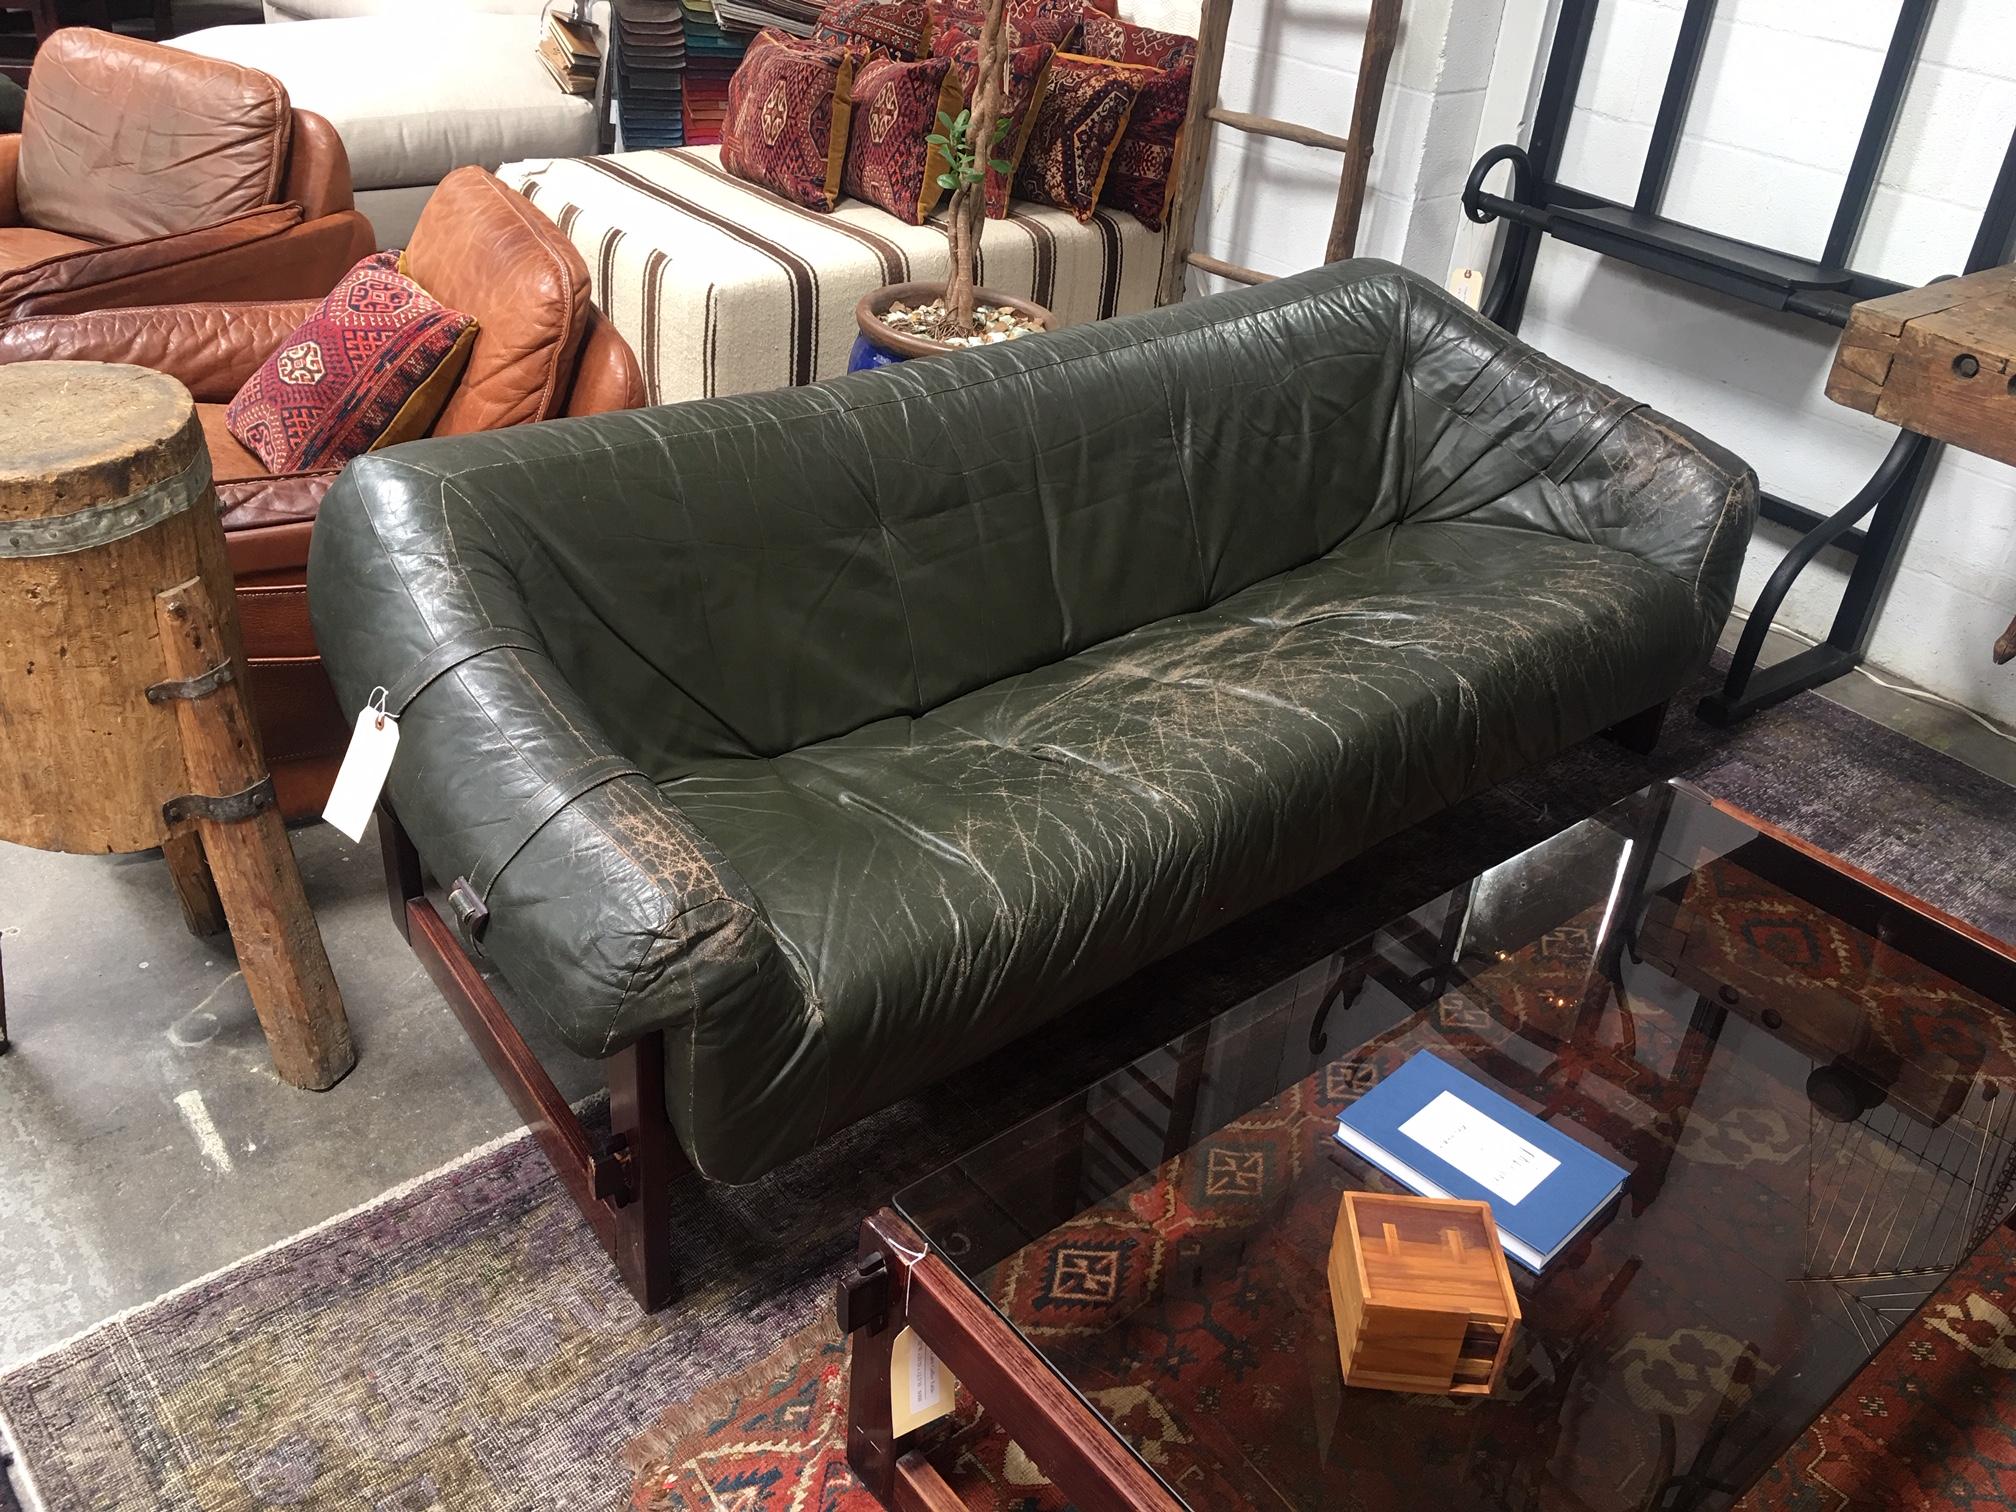 Beautiful Percival Lafer sofa in an emerald green leather. Leather shows patina consistent with the age of the piece.